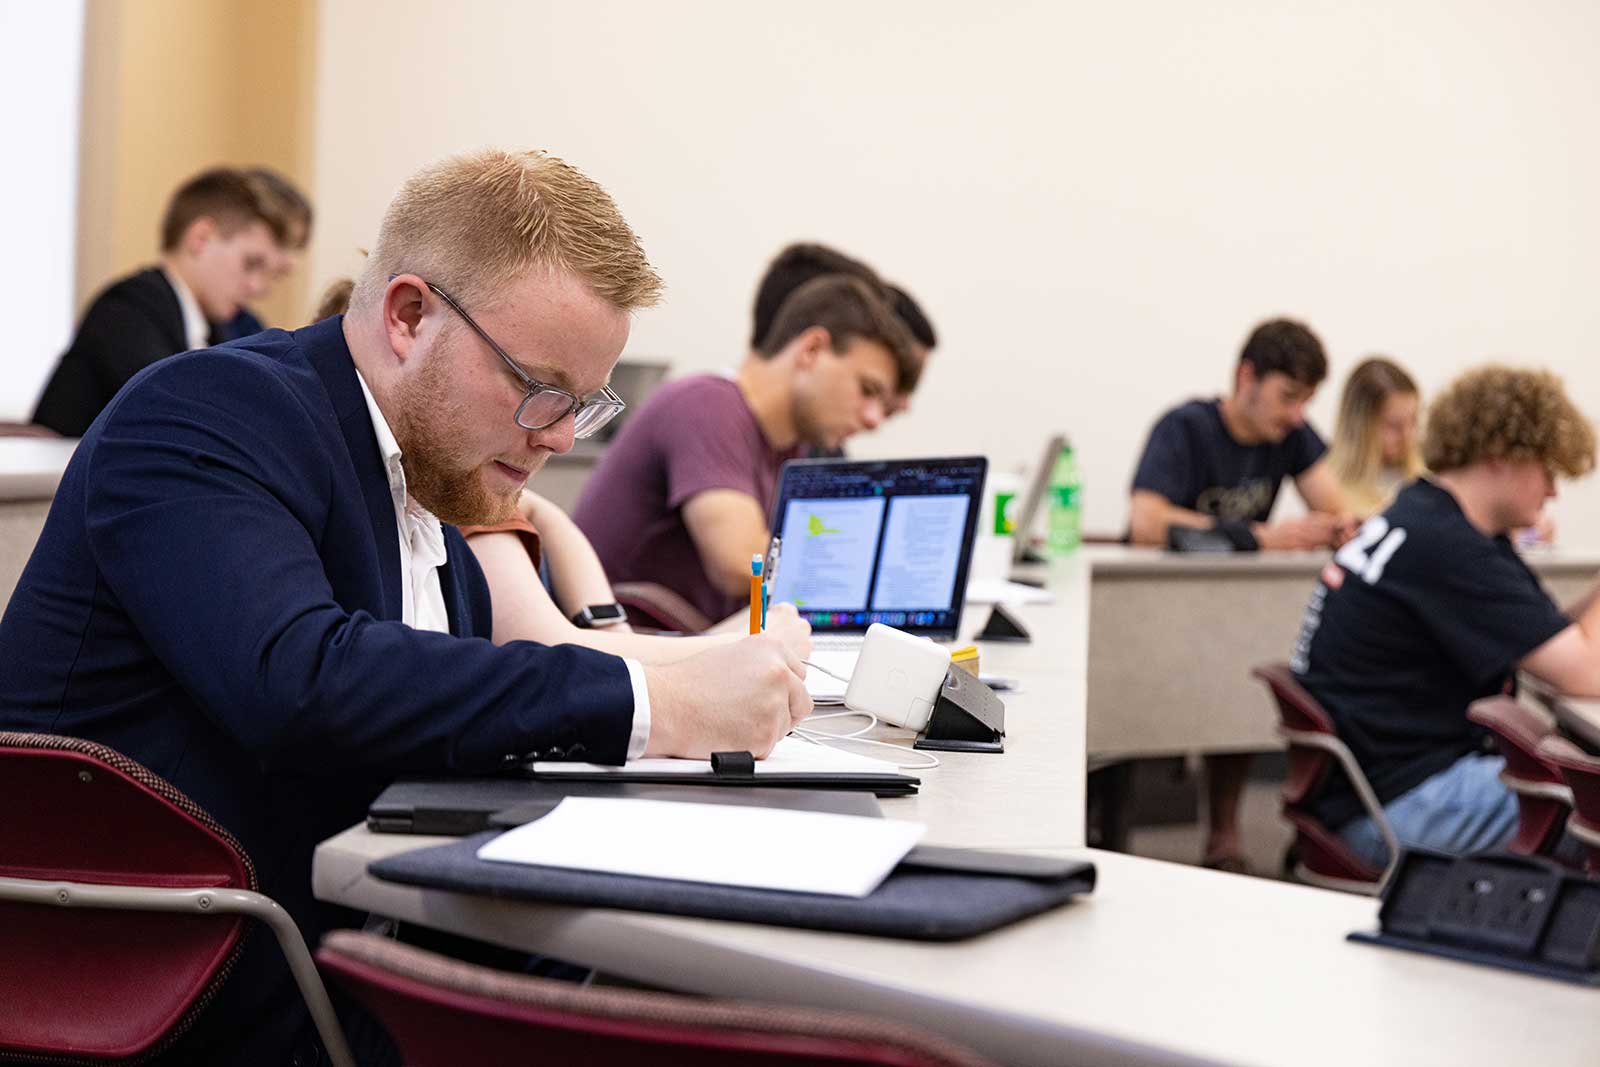 Our undergraduate finance program brings our unique approach to learning, and faith to industry finance courses.